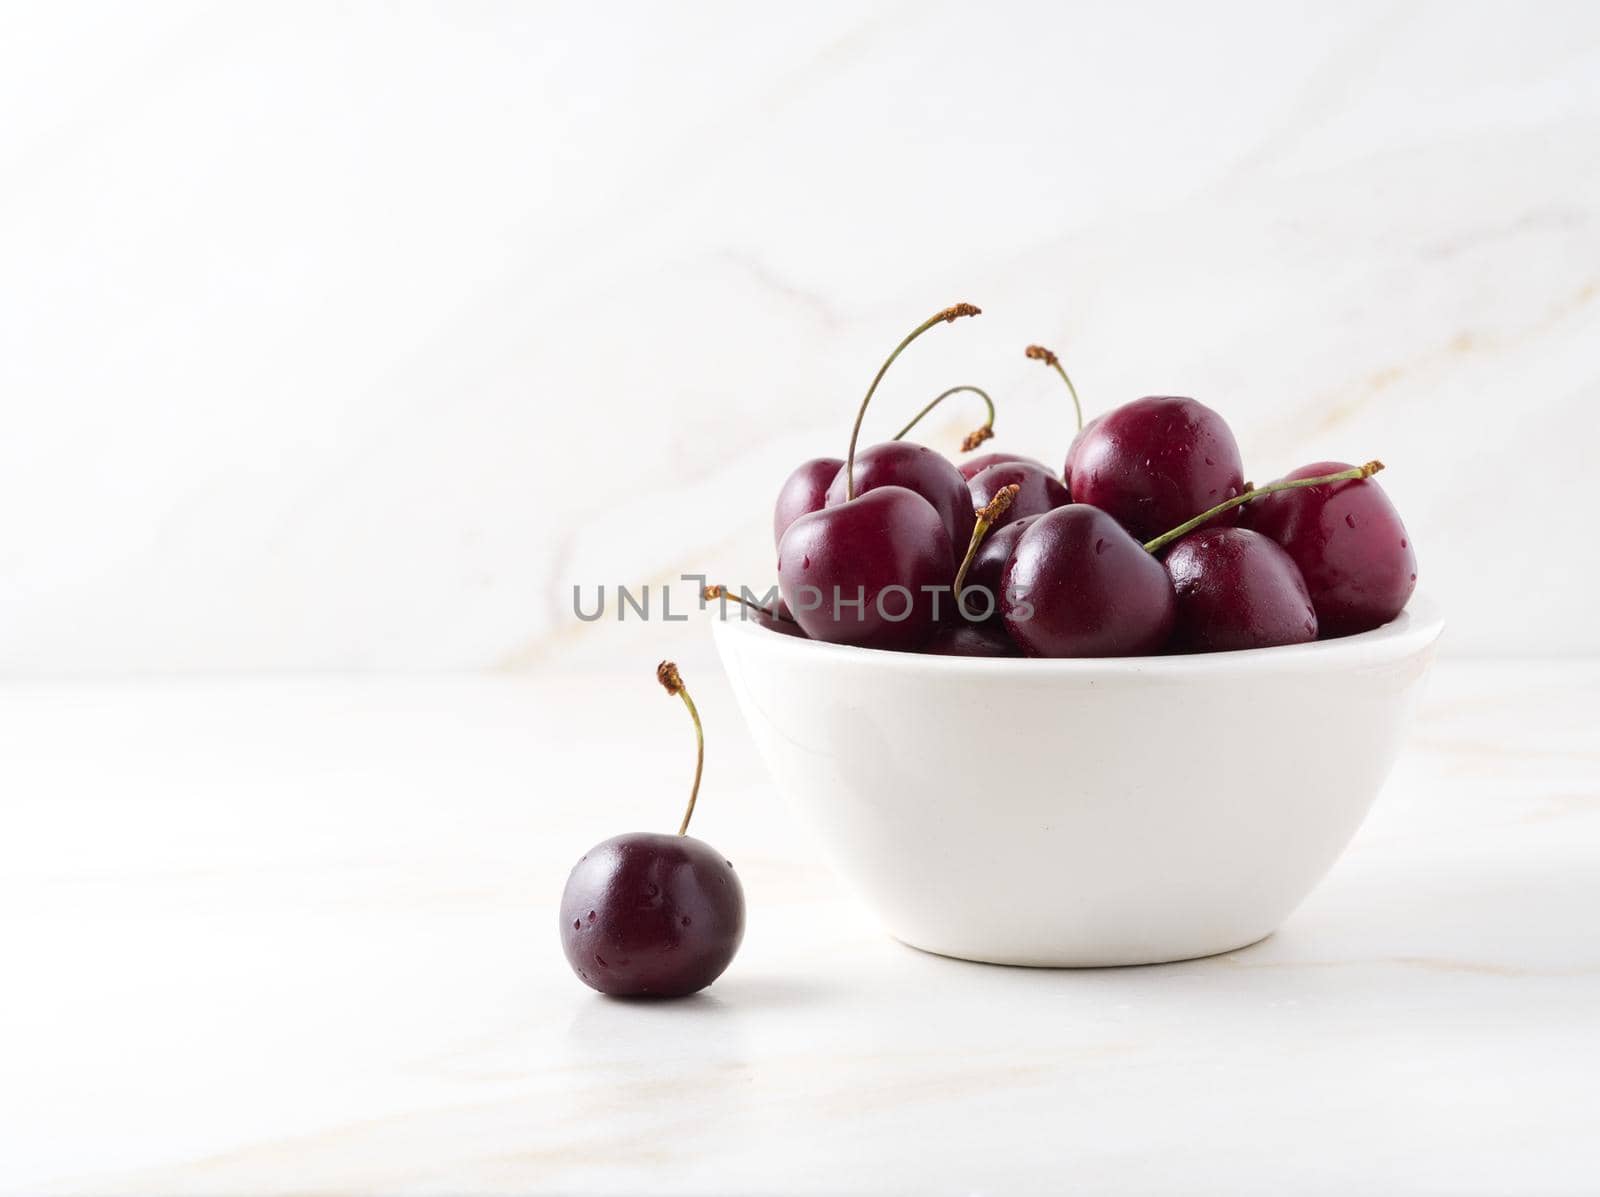 The red dark sweet cherries in white bowl on stone white table, side view, copy space